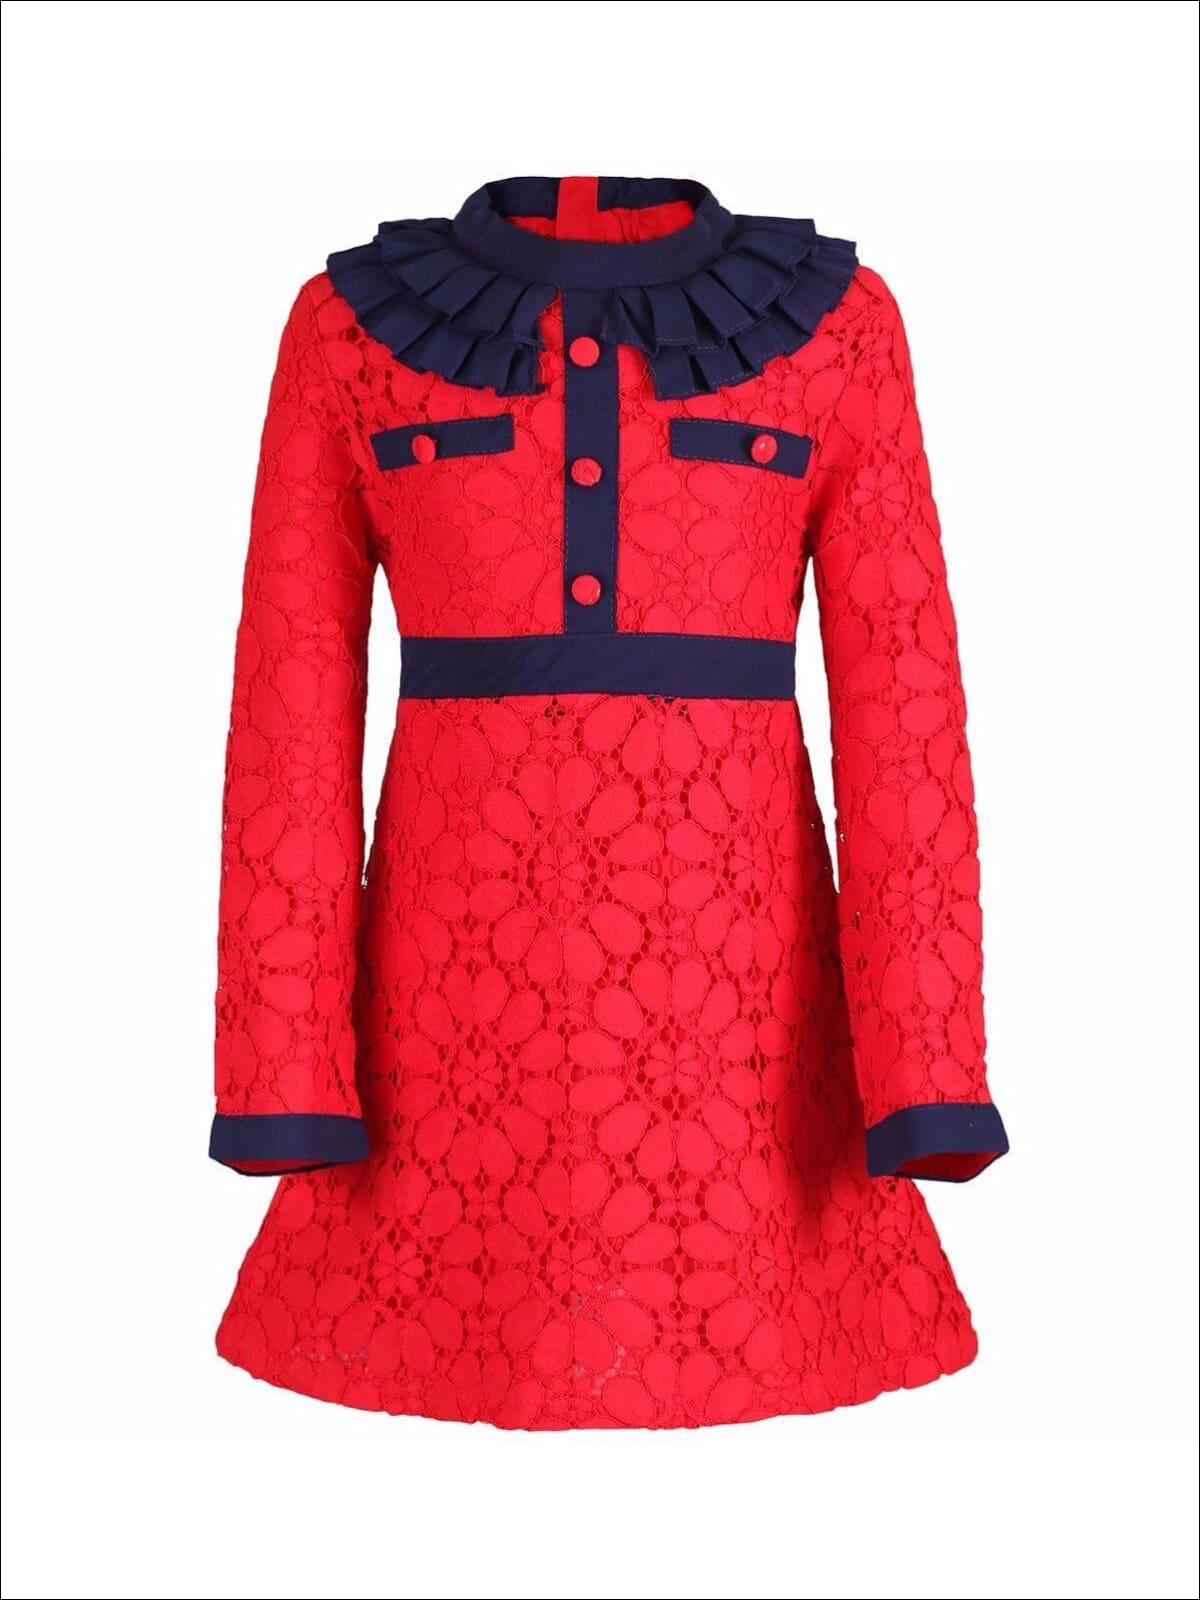 Girls Preppy Red & Navy Lace Ruffled Collar A-Line Dress - Red/Navy / 2T - Girls Fall Dressy Dress